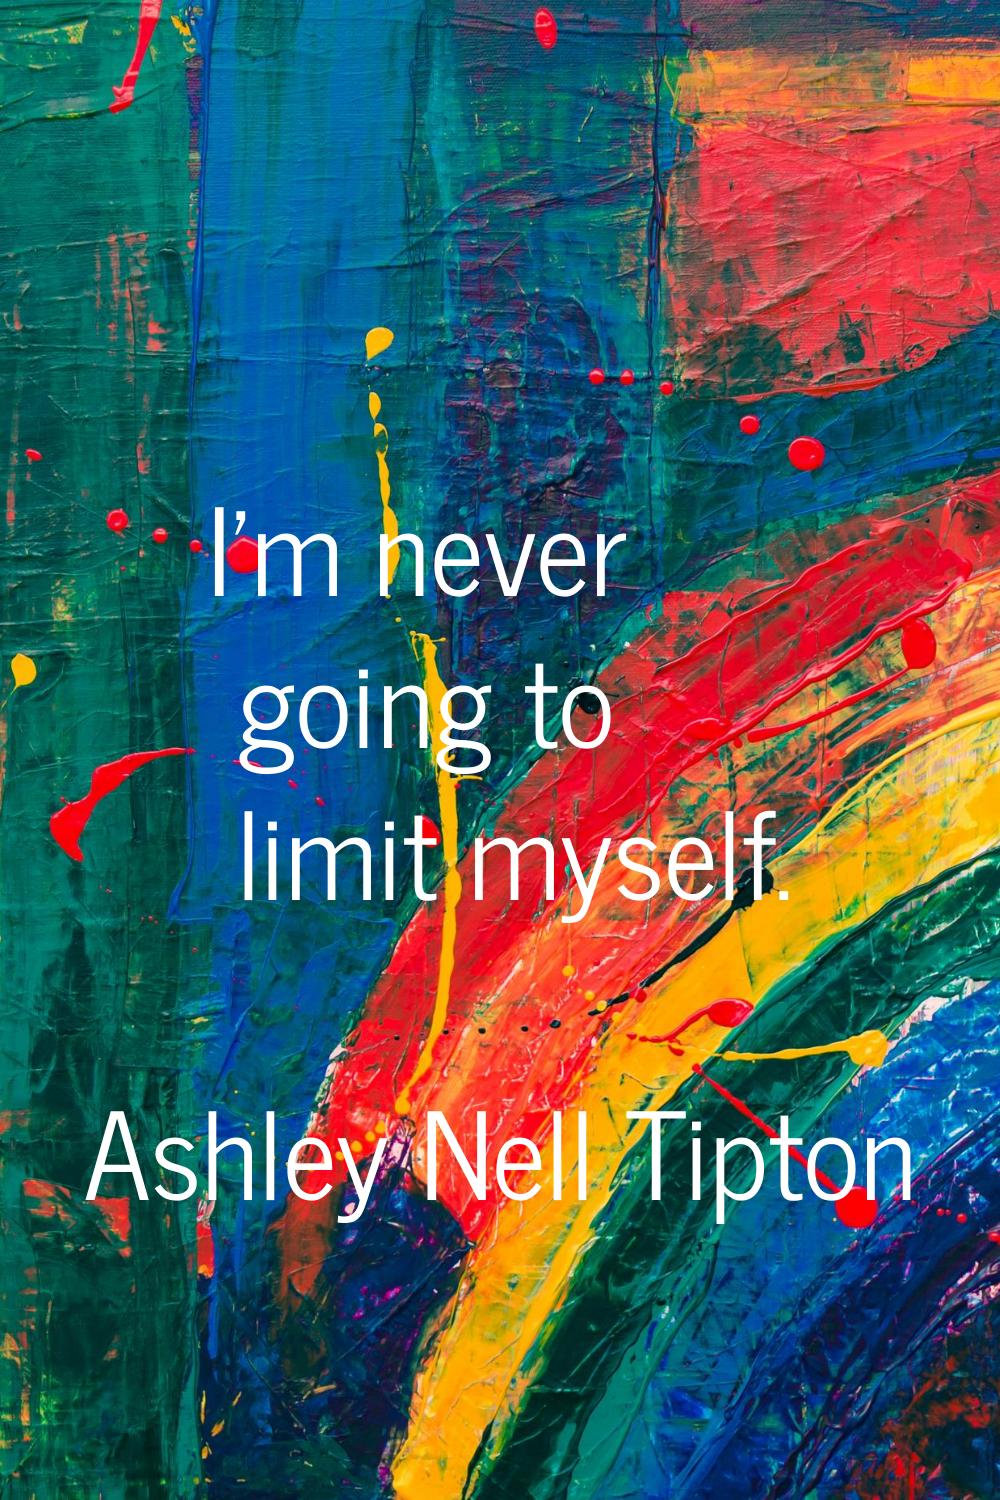 I'm never going to limit myself.